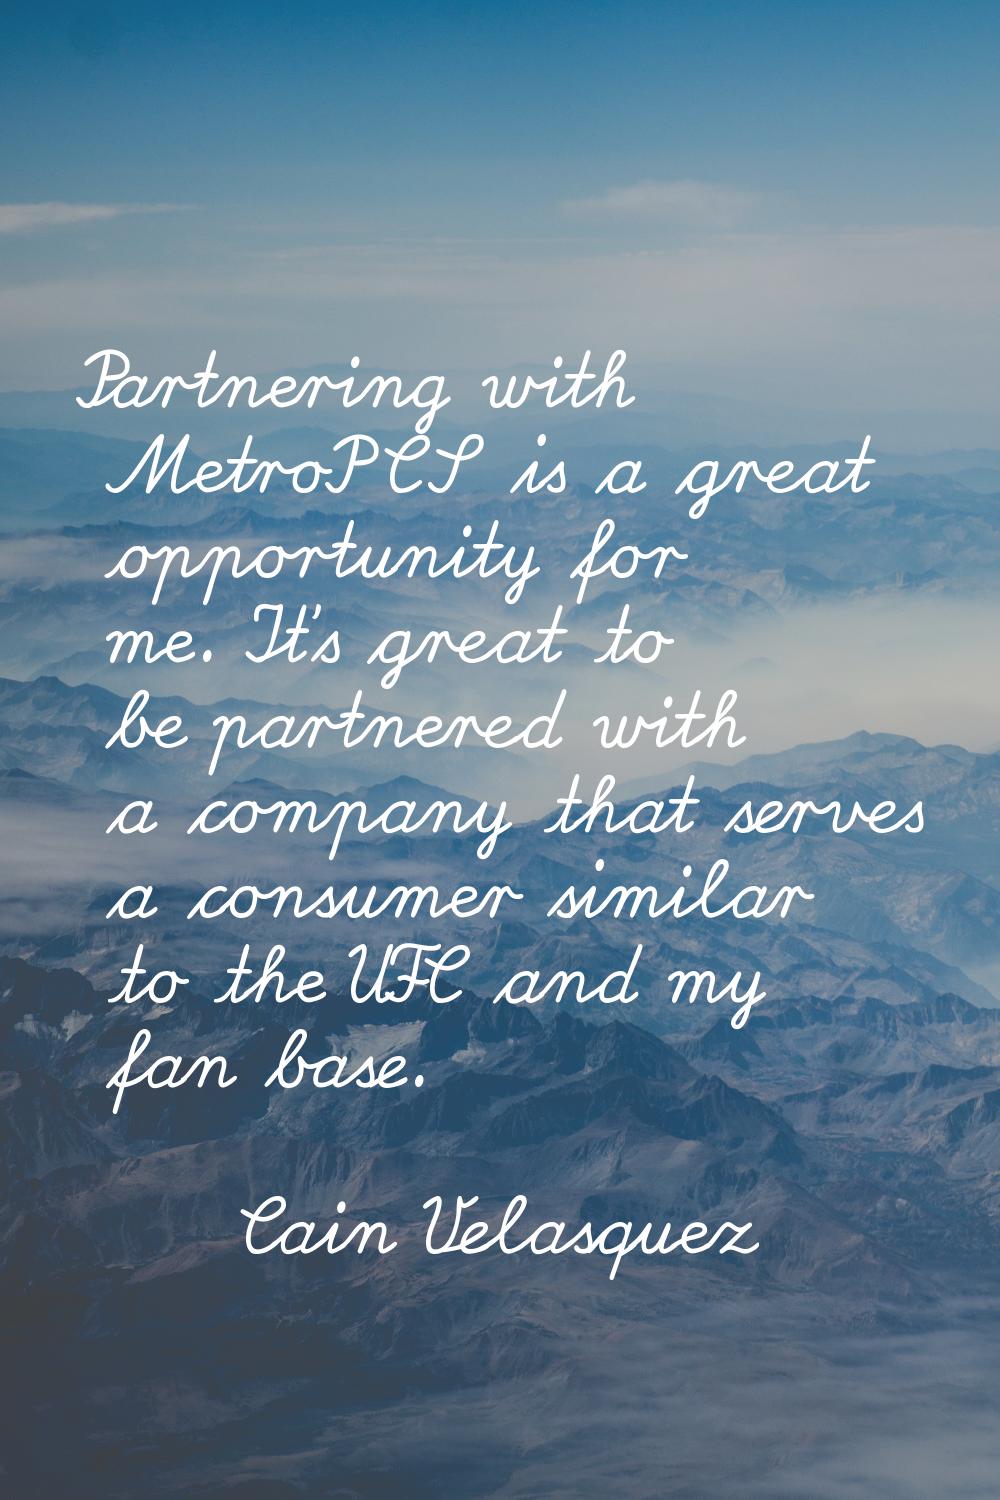 Partnering with MetroPCS is a great opportunity for me. It's great to be partnered with a company t